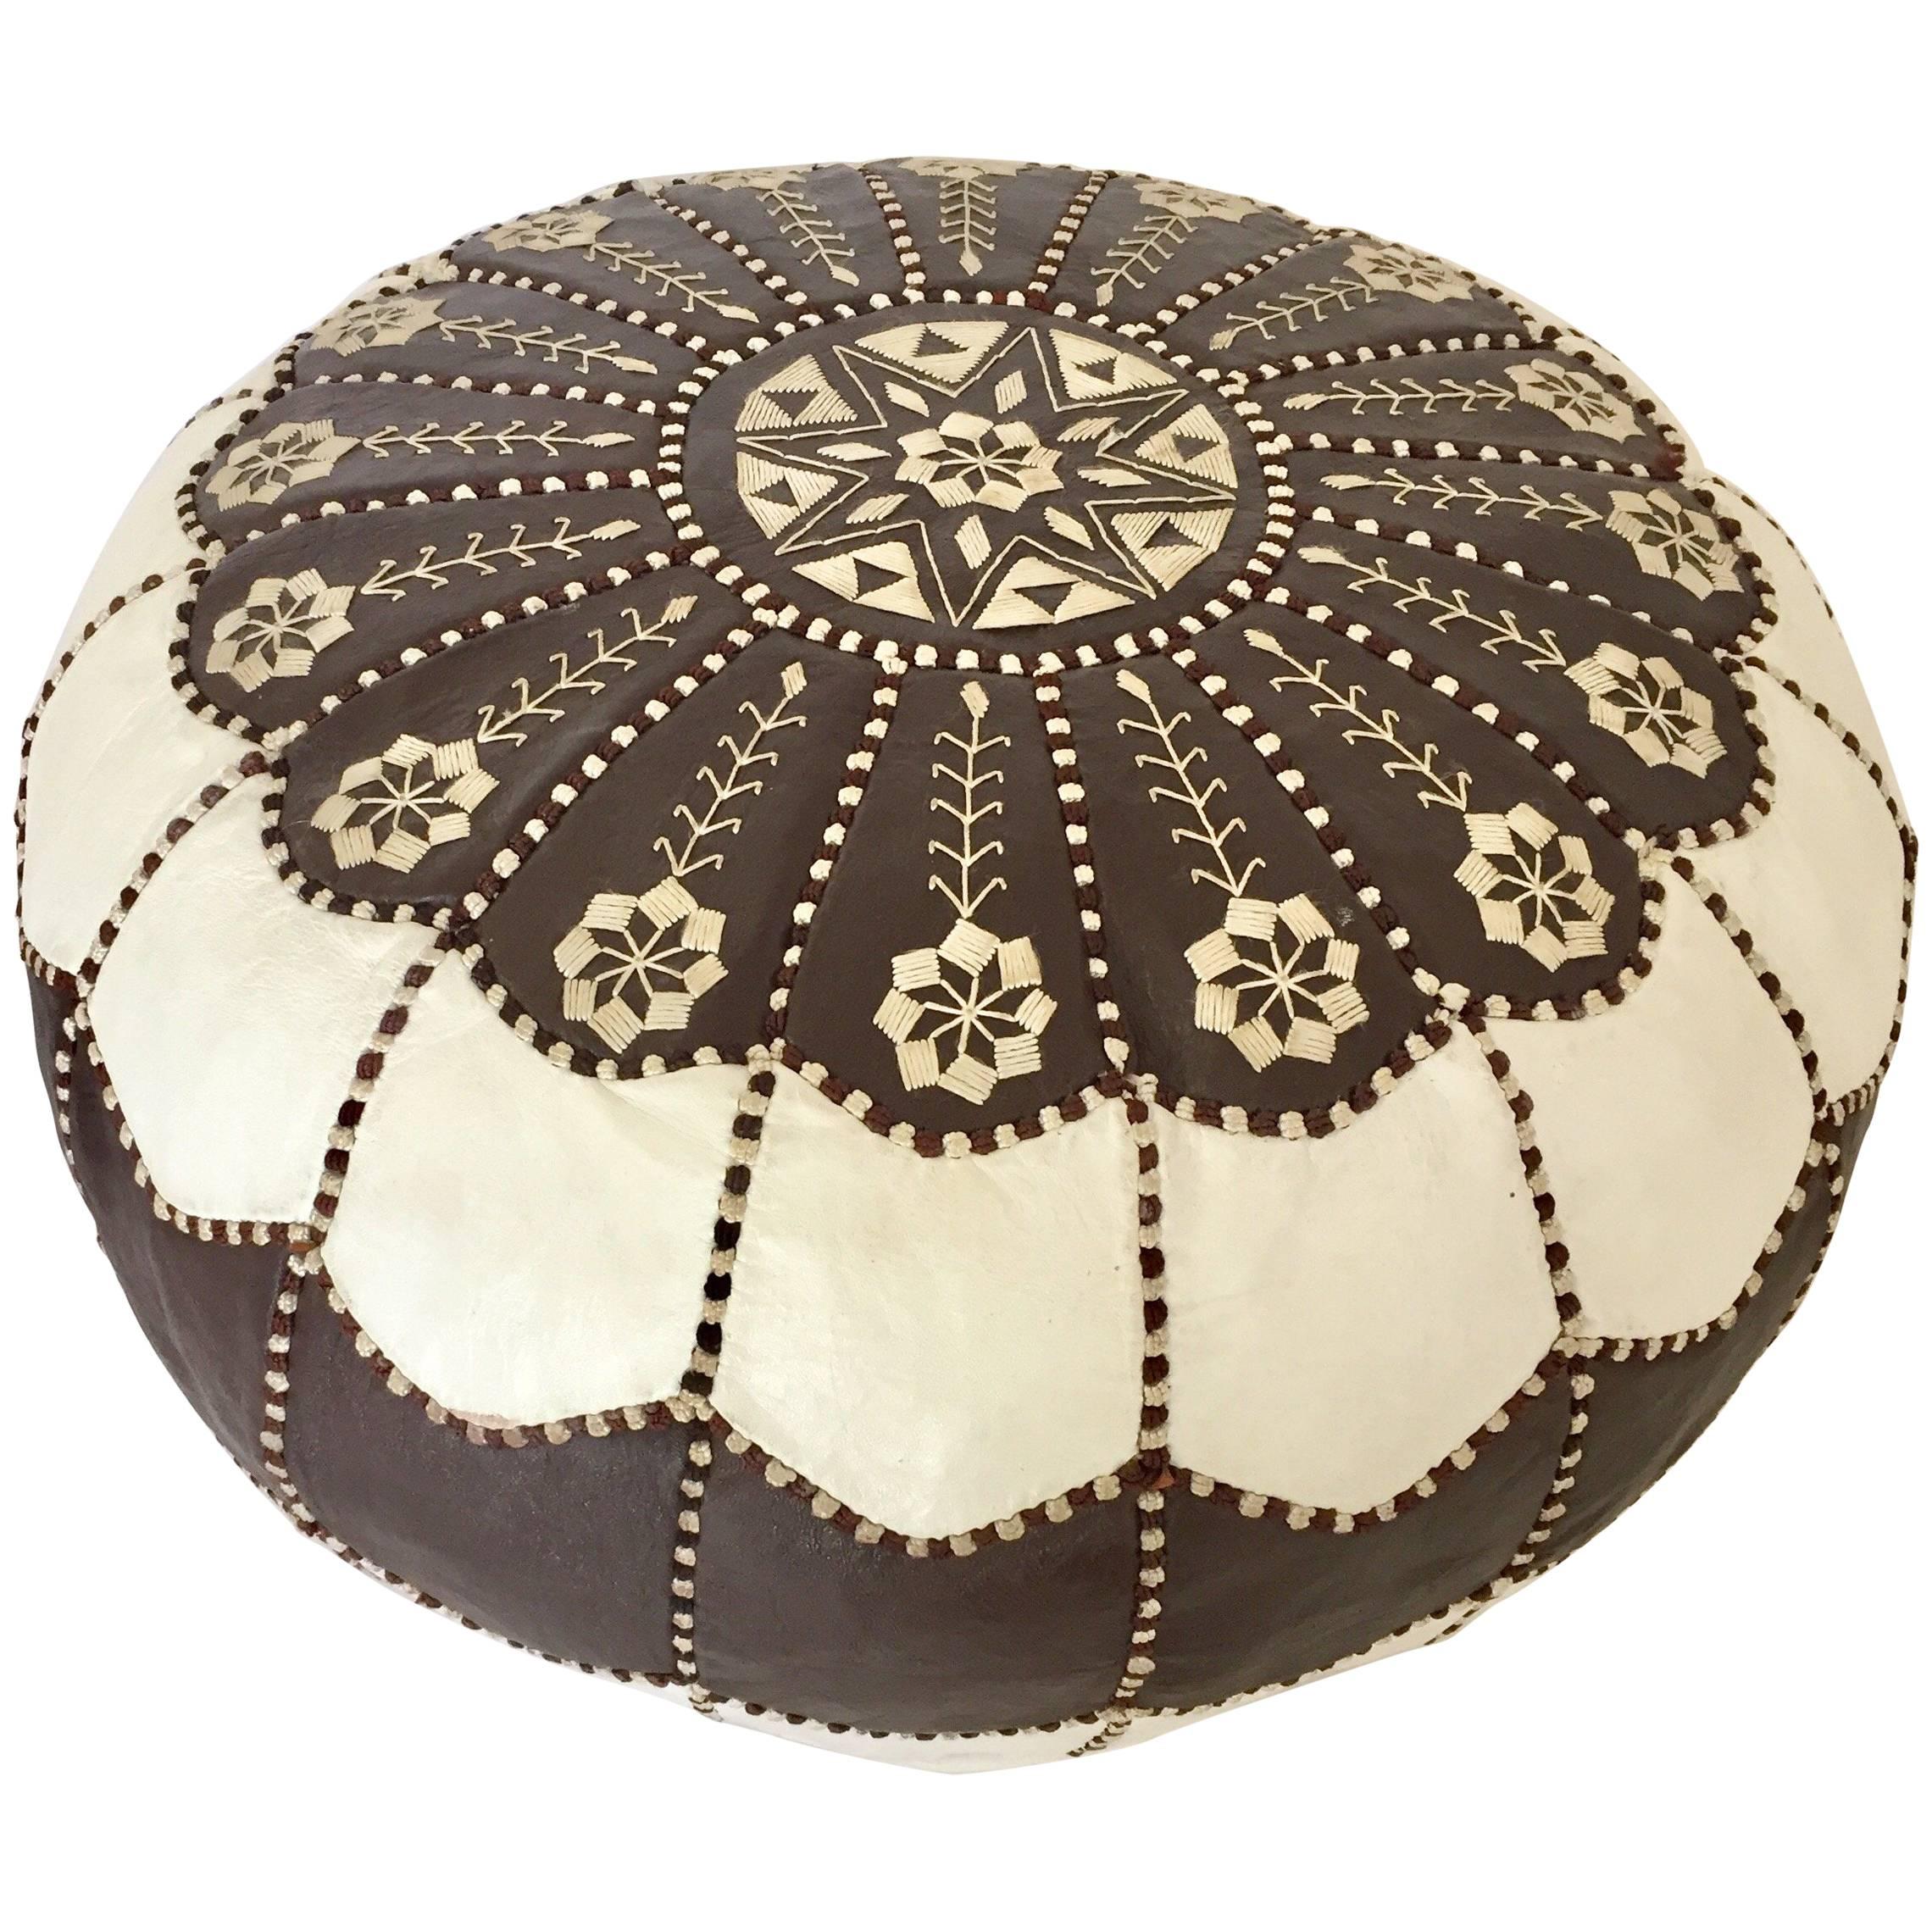 Moroccan Vintage Round Leather Pouf Brown and White Embroidered